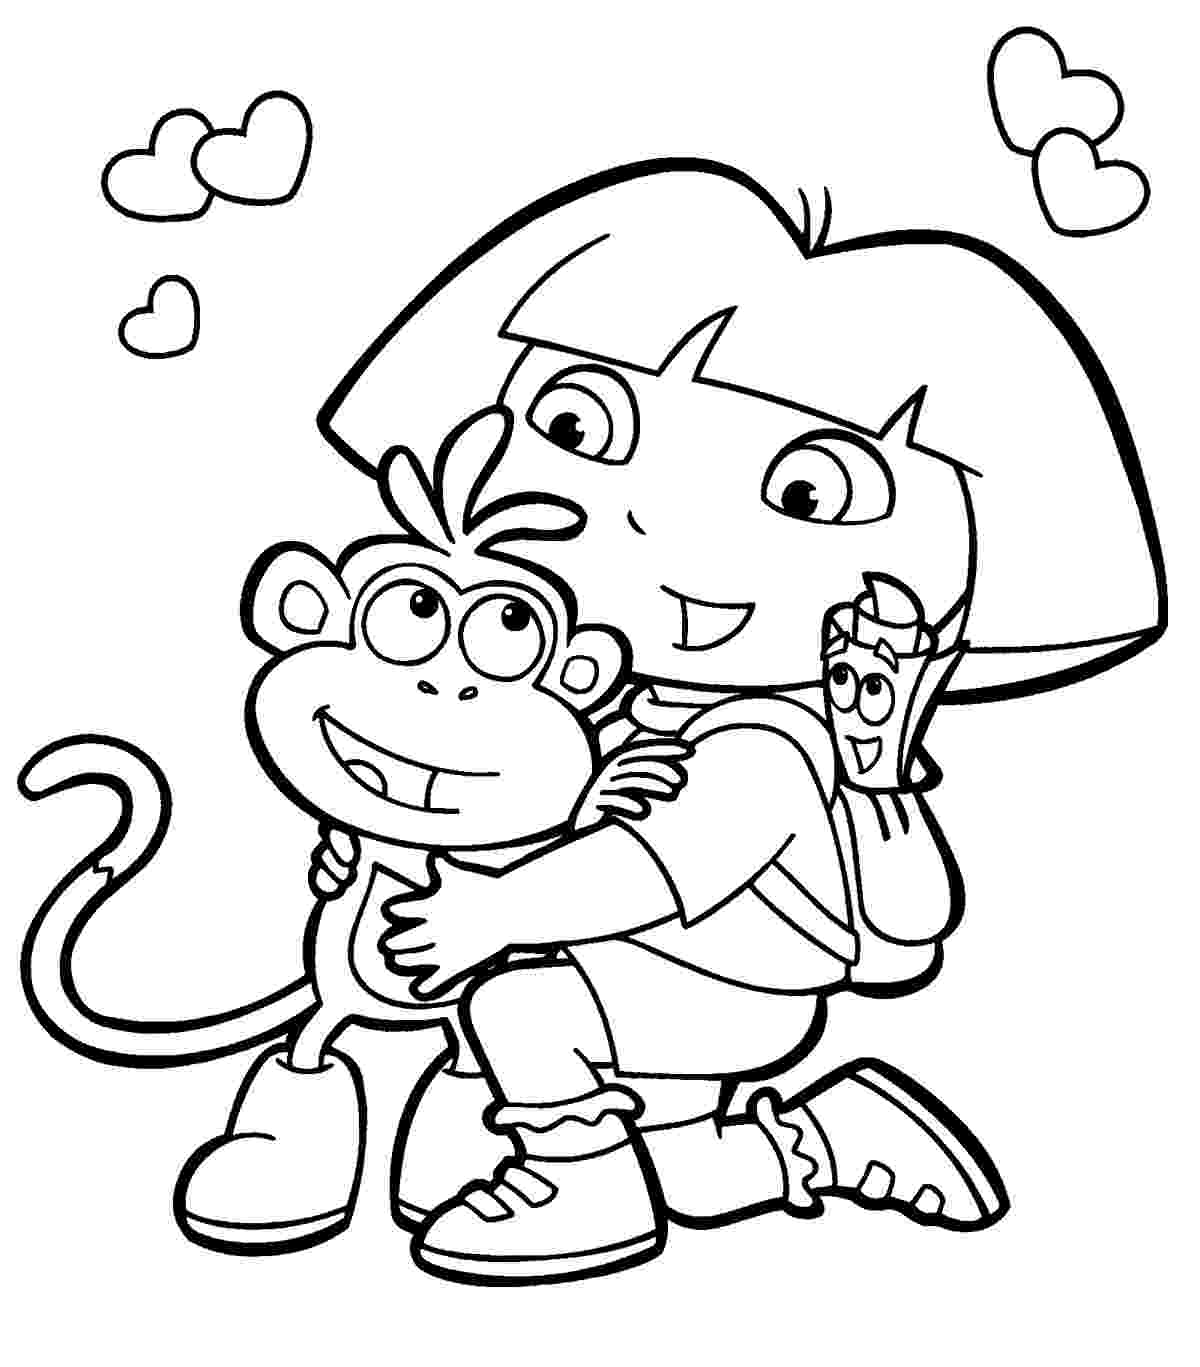 dora images for colouring dora coloring pages cutecoloringcom images colouring dora for 